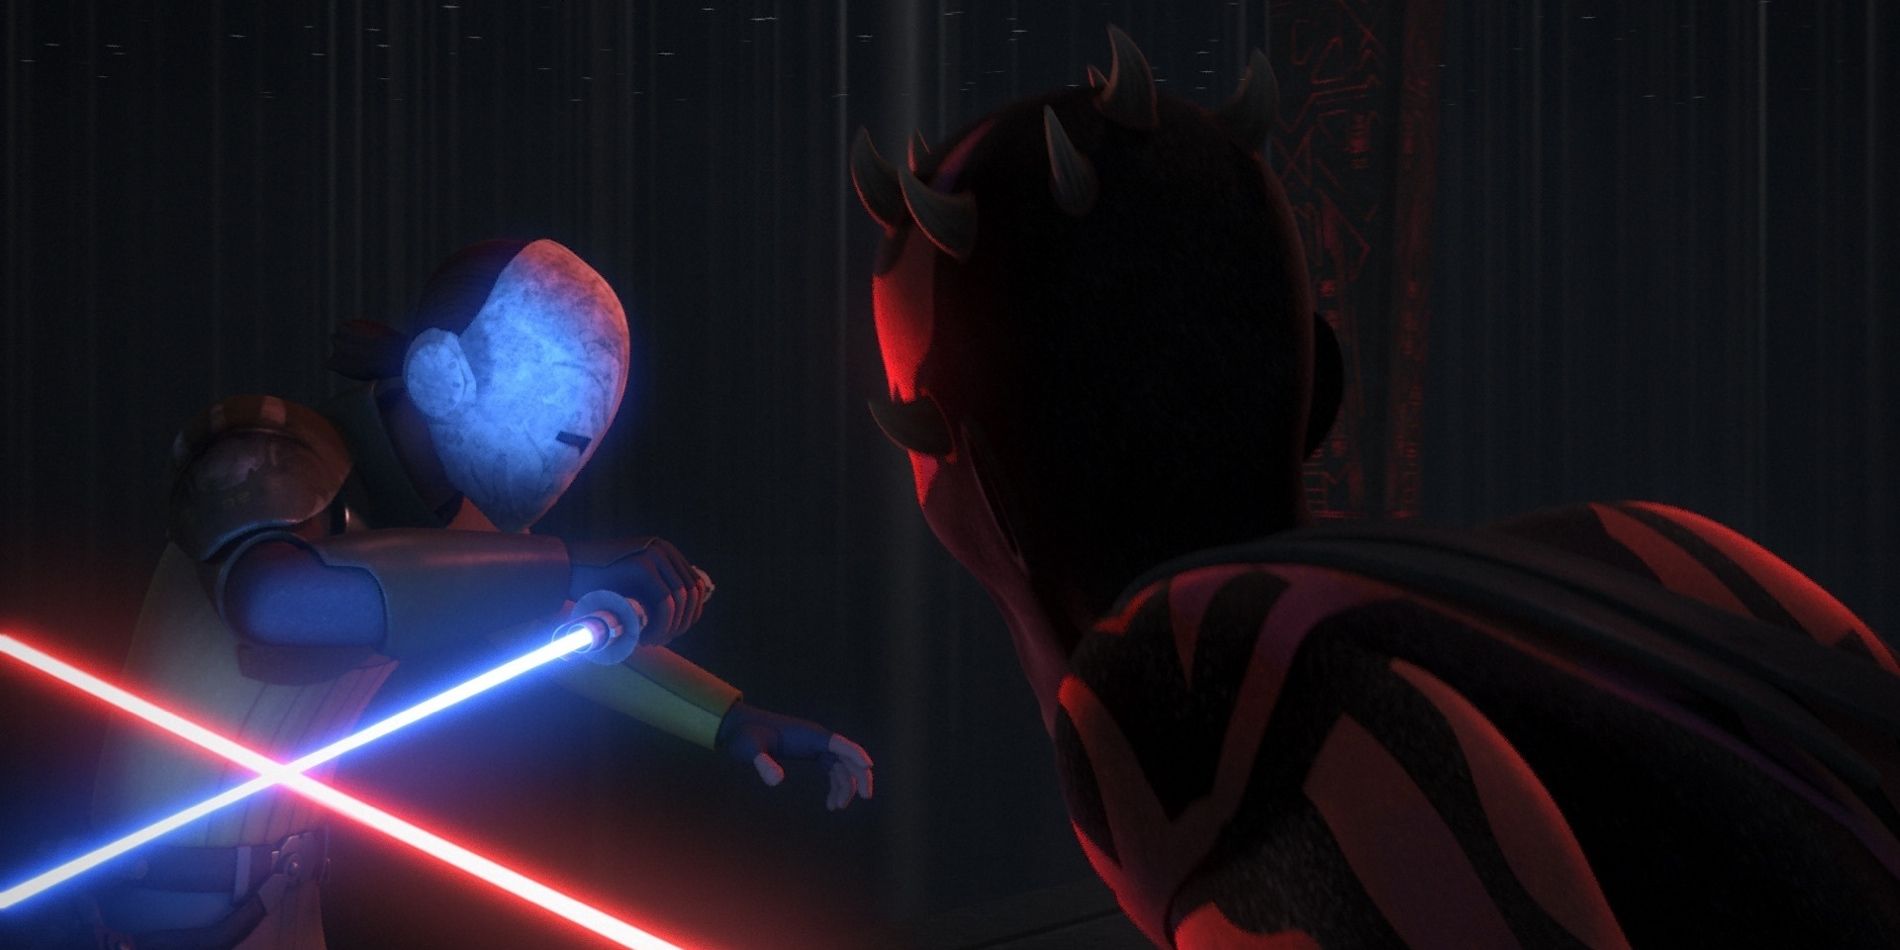 Kanan fights with Maul after he gets blinded on Malachor in Star Wars Rebels